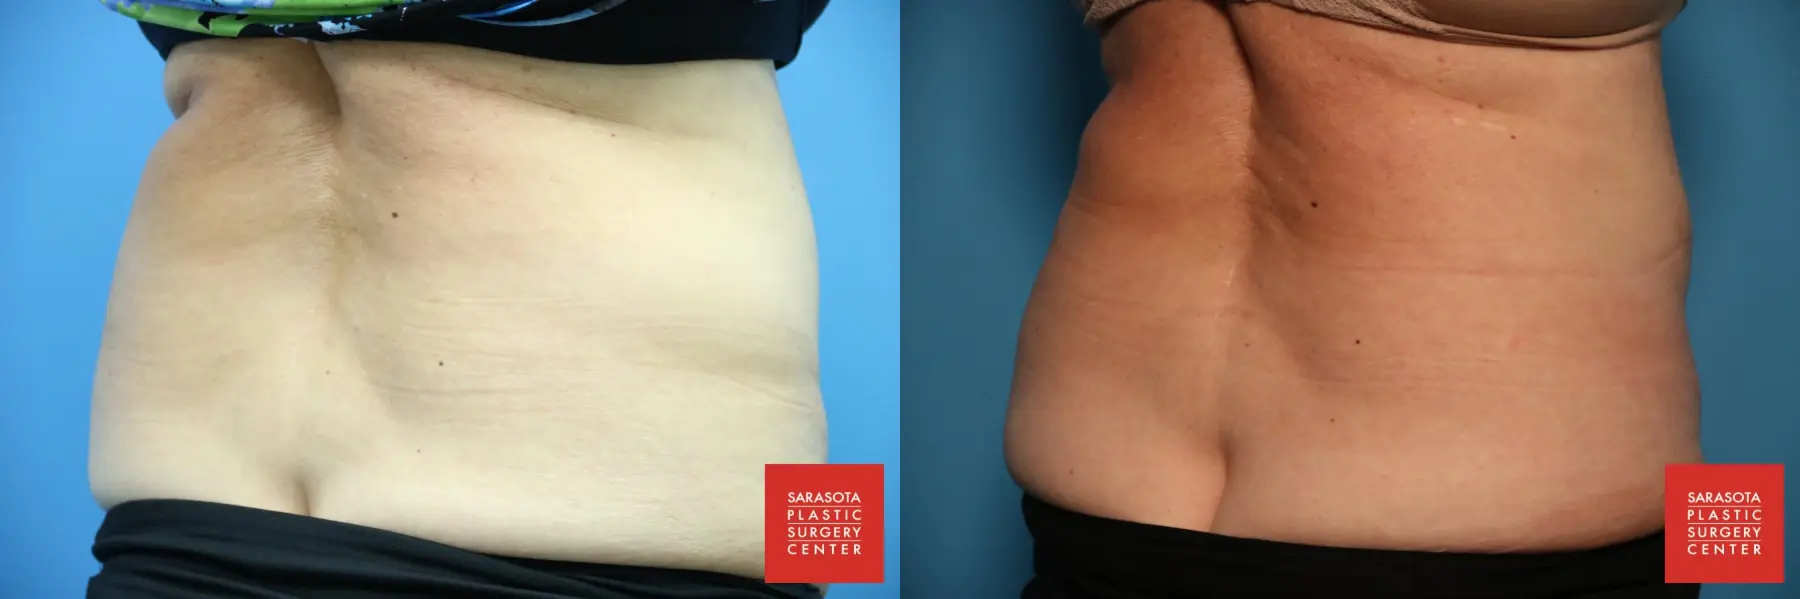 CoolSculpting®: Patient 6 - Before and After 6